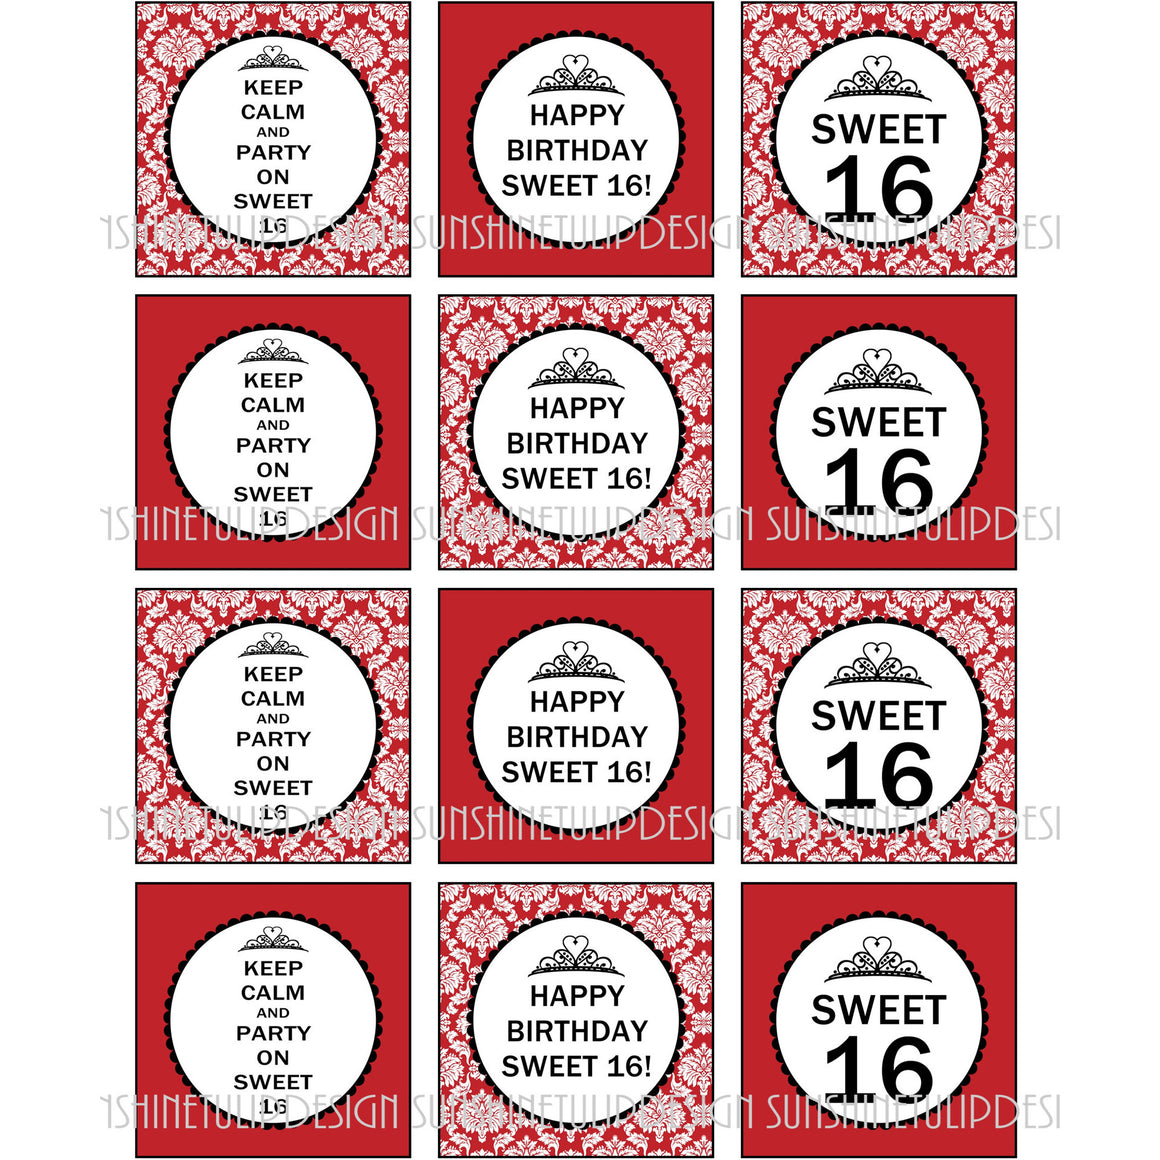 Printable Sweet 16 Birthday Cupcake Toppers, Sticker Labels & Party Favor Tags by SUSHINETULIPDESIGN - Sunshinetulipdesign